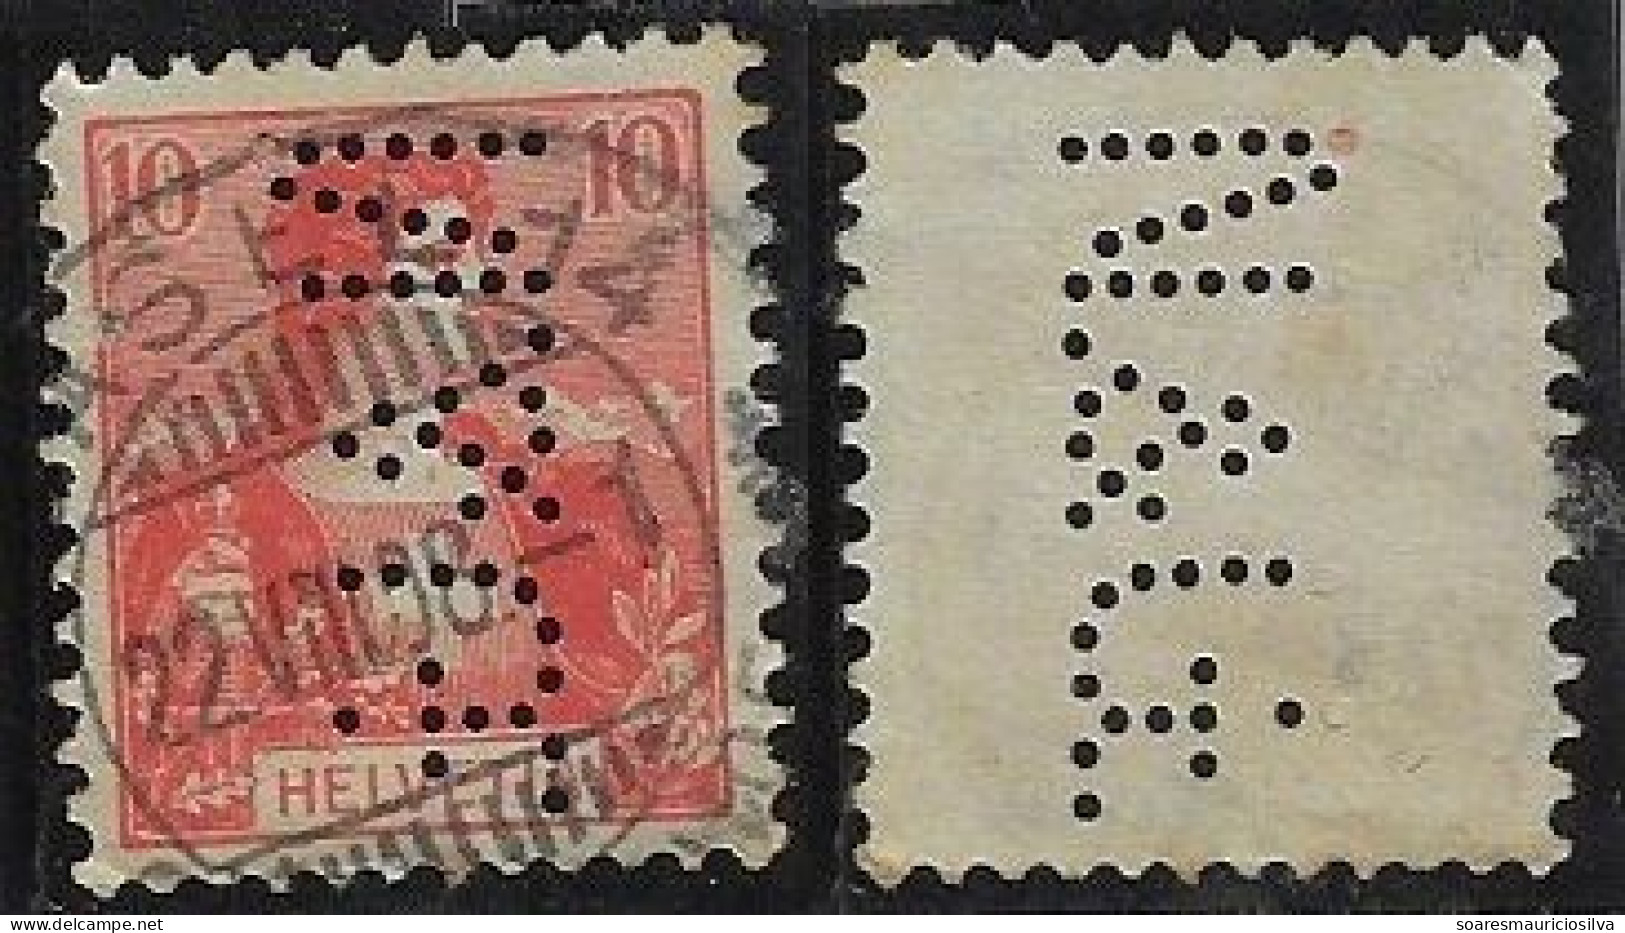 Switzerland 1905/1919 Stamp With Perfin N.&G. By Niebergall & Goth International Transport From Basel Lochung Perfore - Perfins